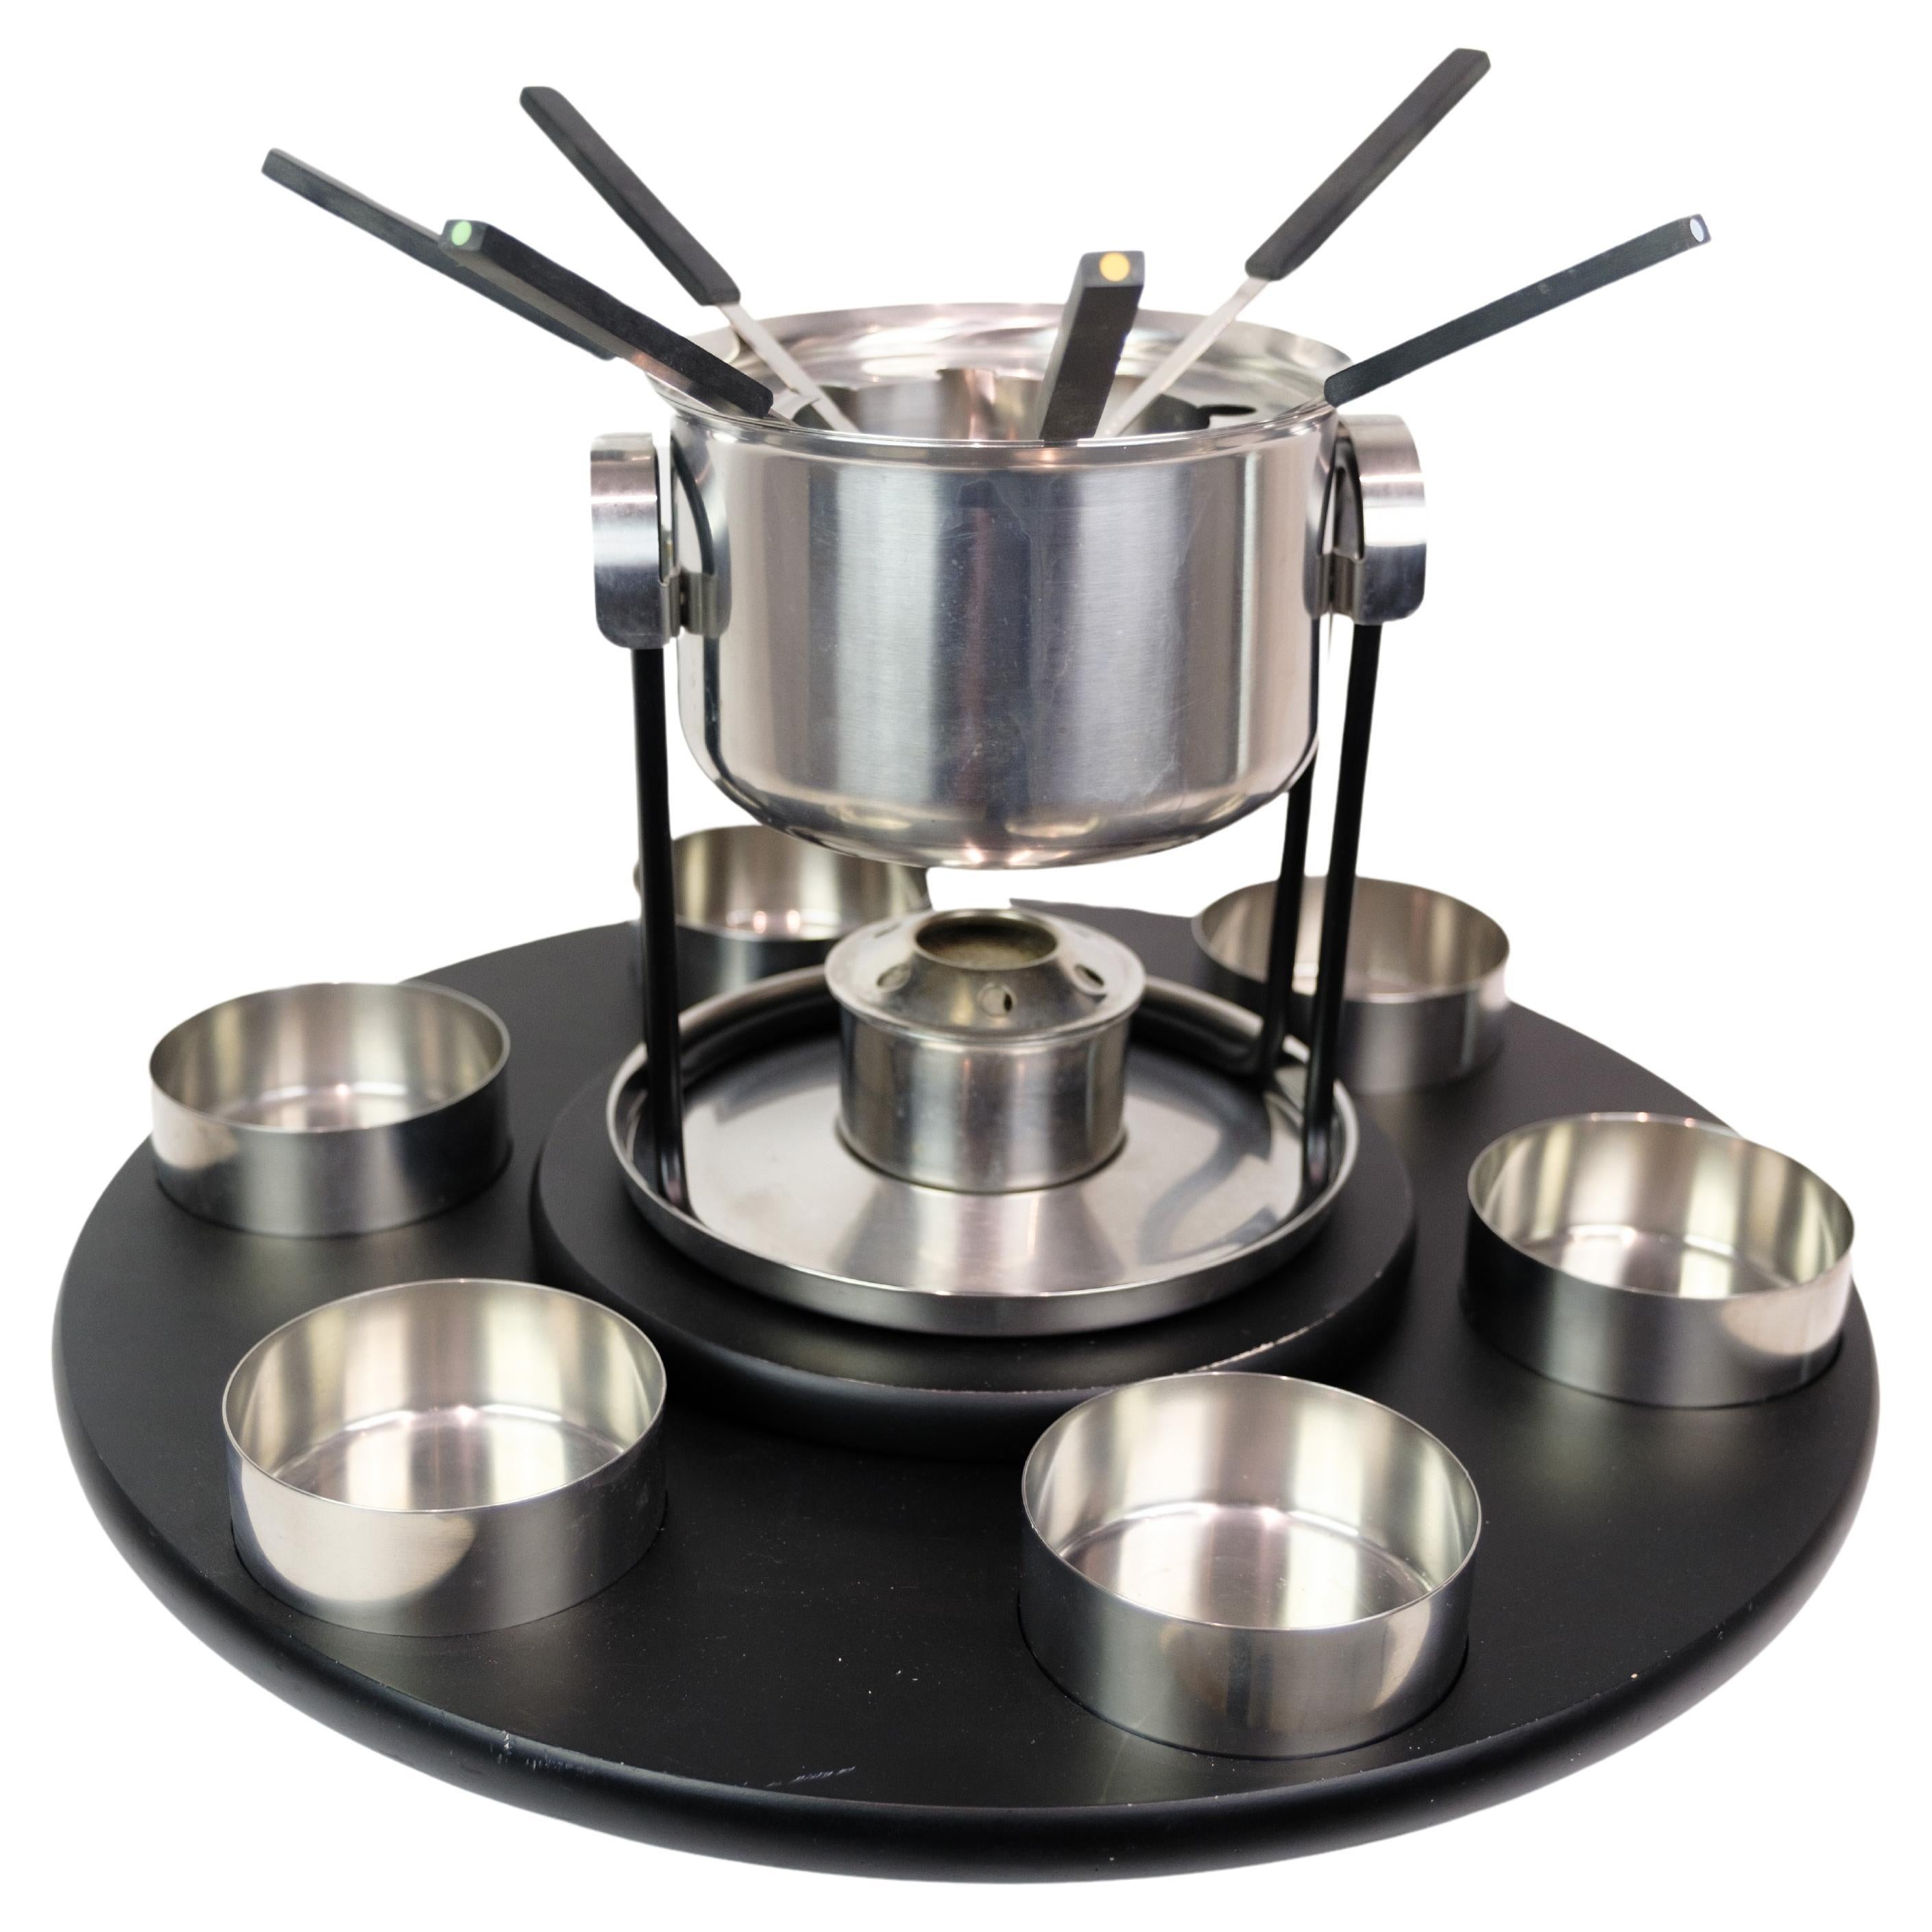 Fondue set In Stainless steel 6 Bowls and 6 forks From Stelton, Arne Jacobsen  For Sale